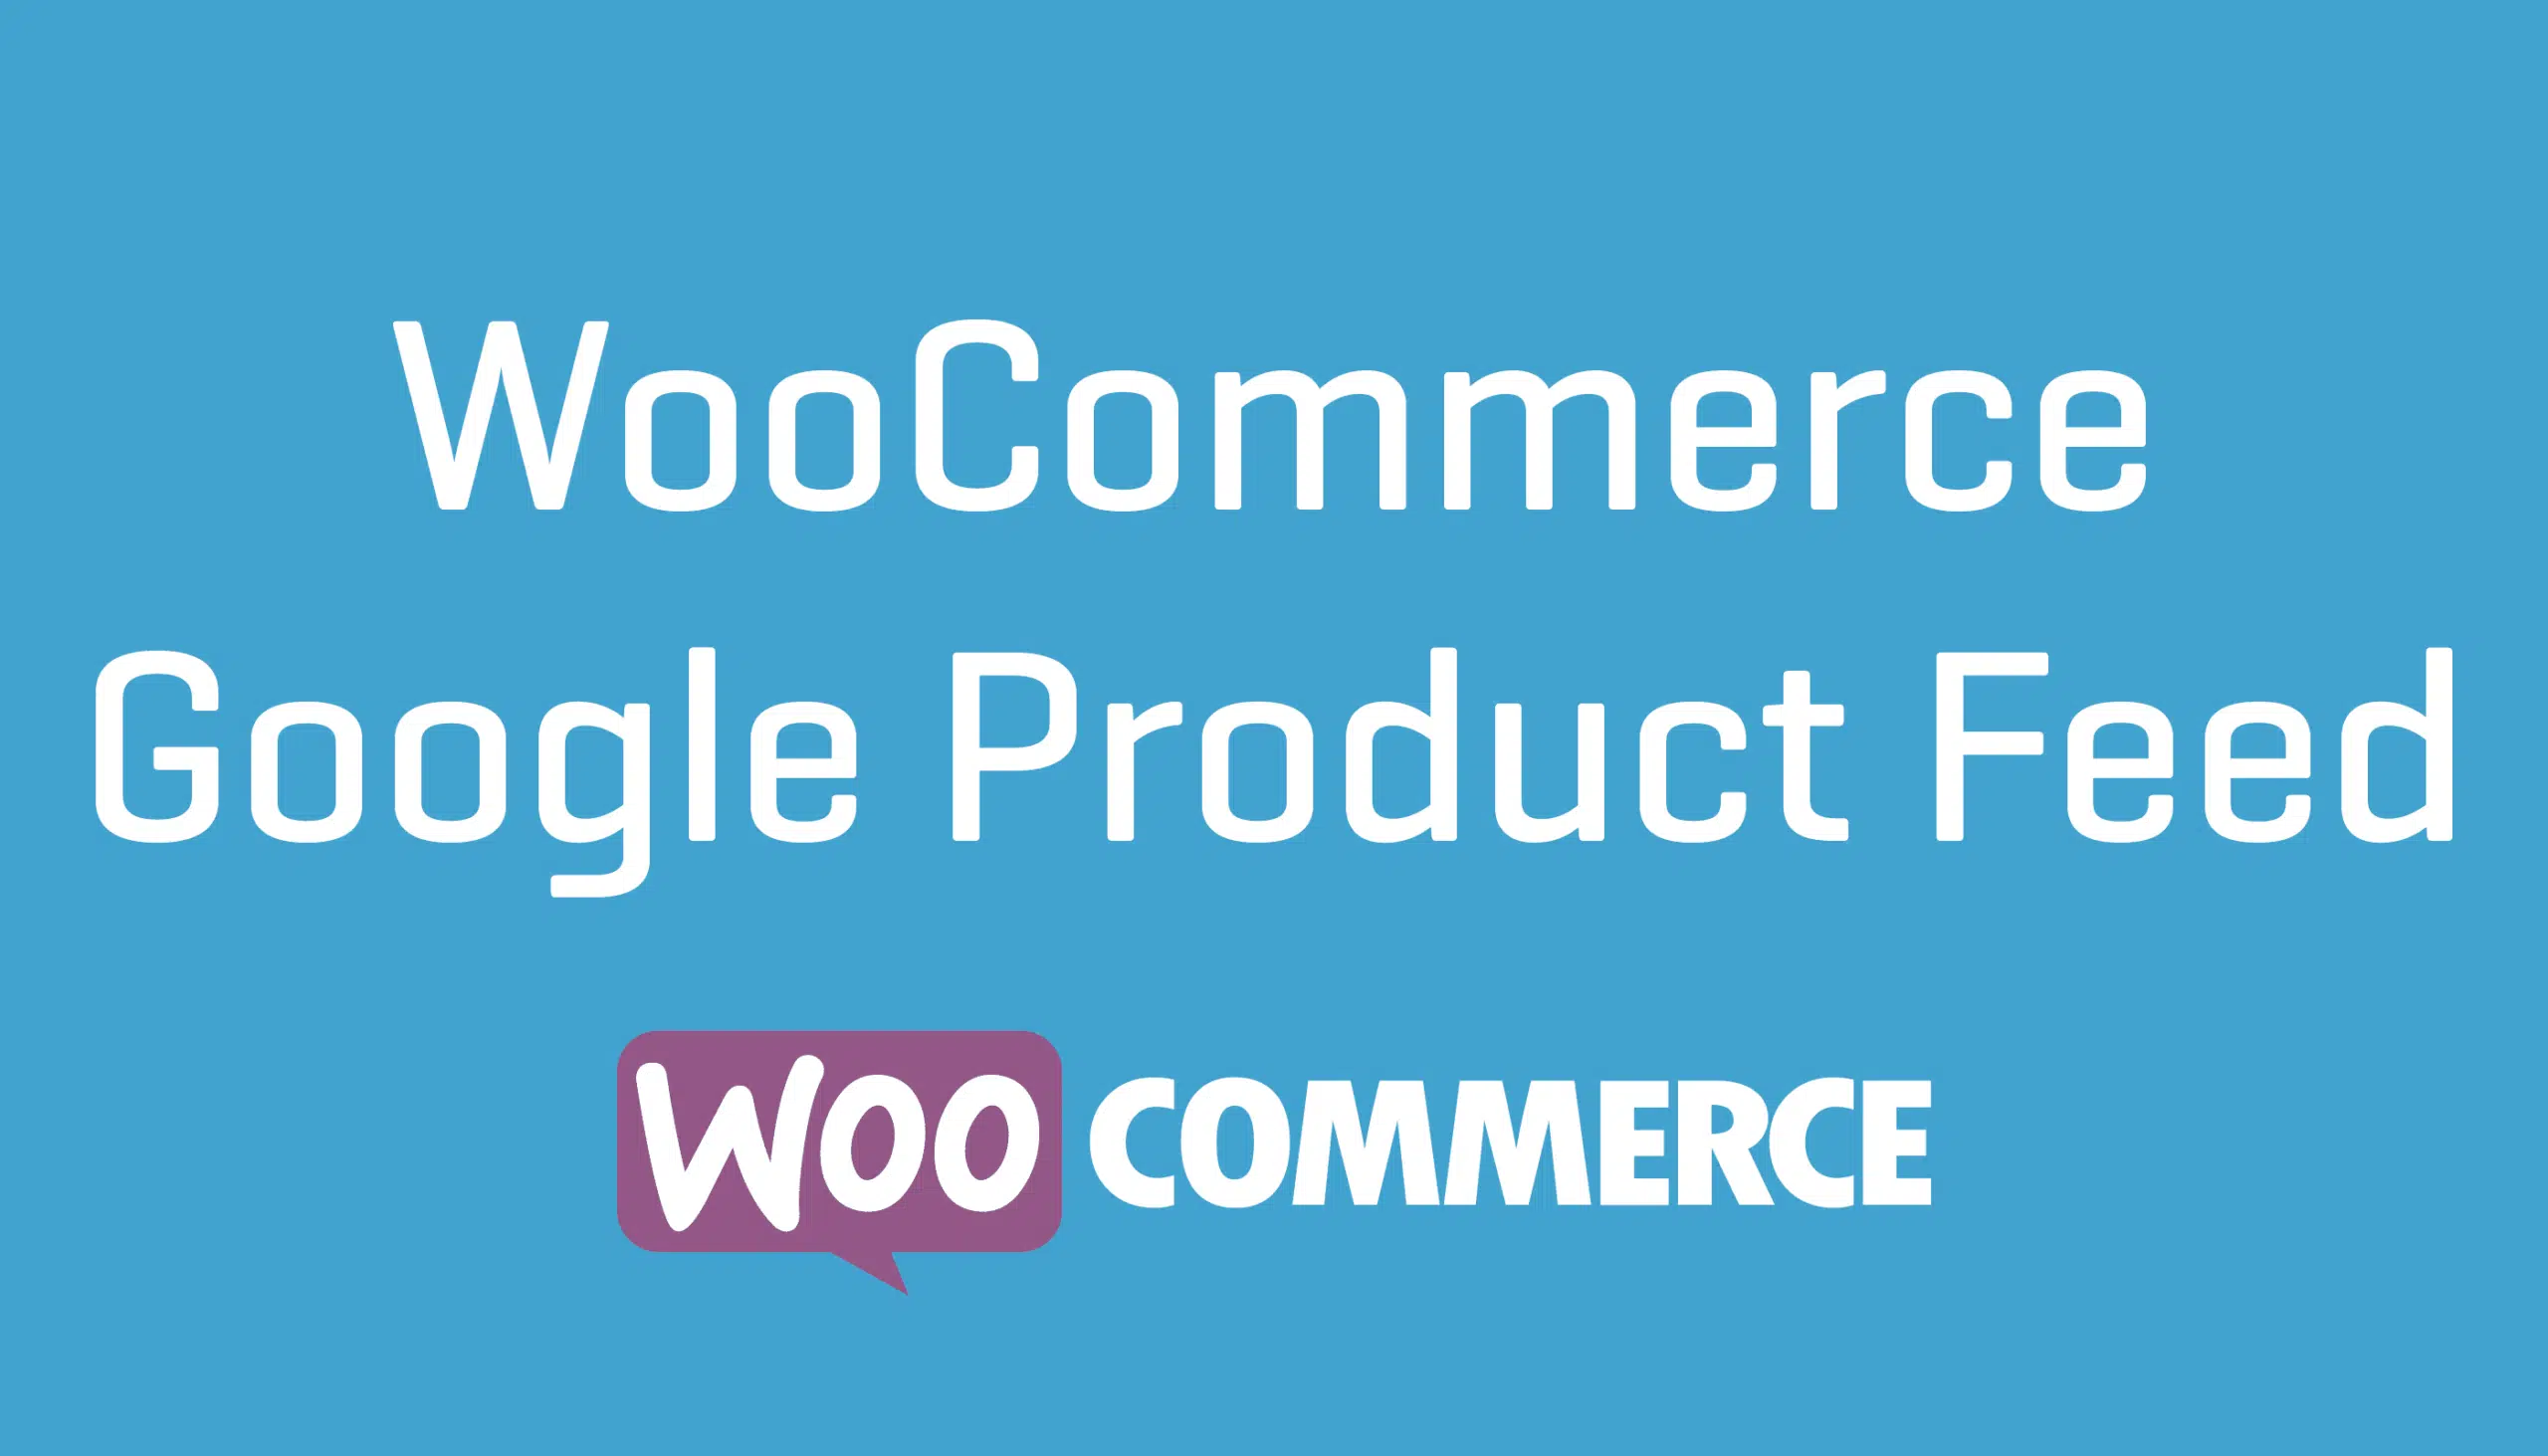 Google Product Feed for WooCommerce 9.6.5